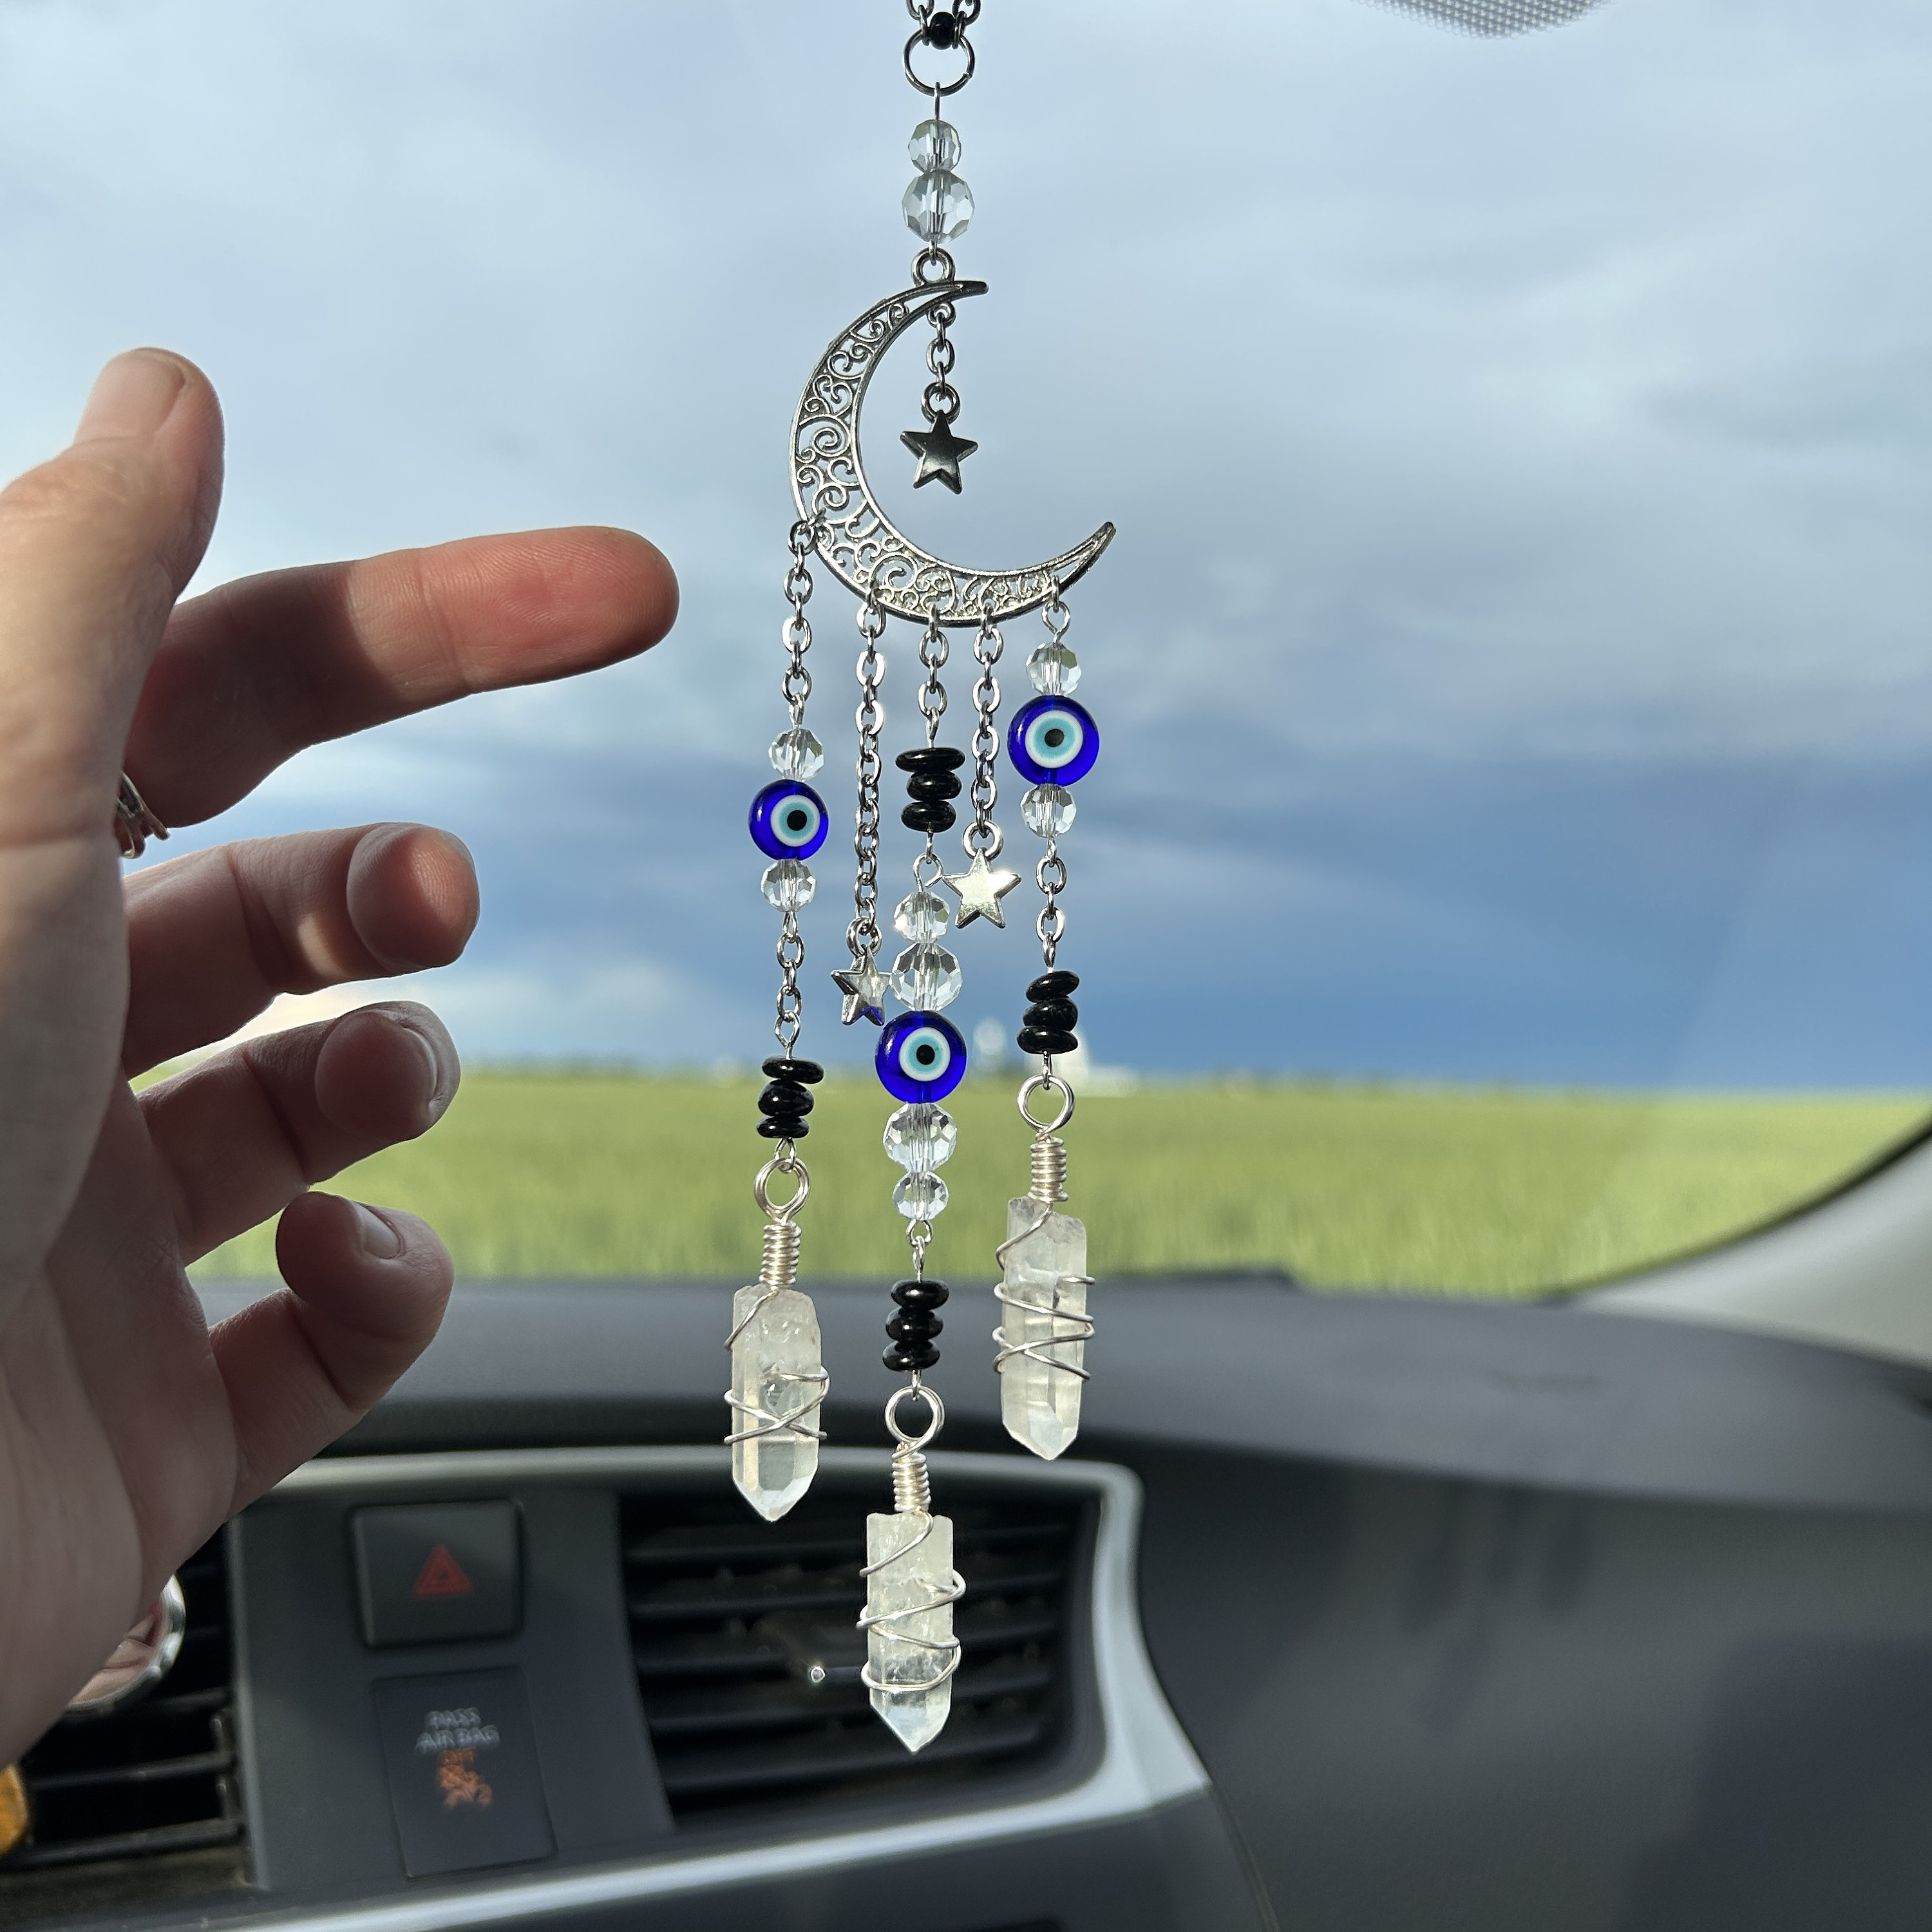 Car Protection Charm, Witch Bells for Door, Strong Protection